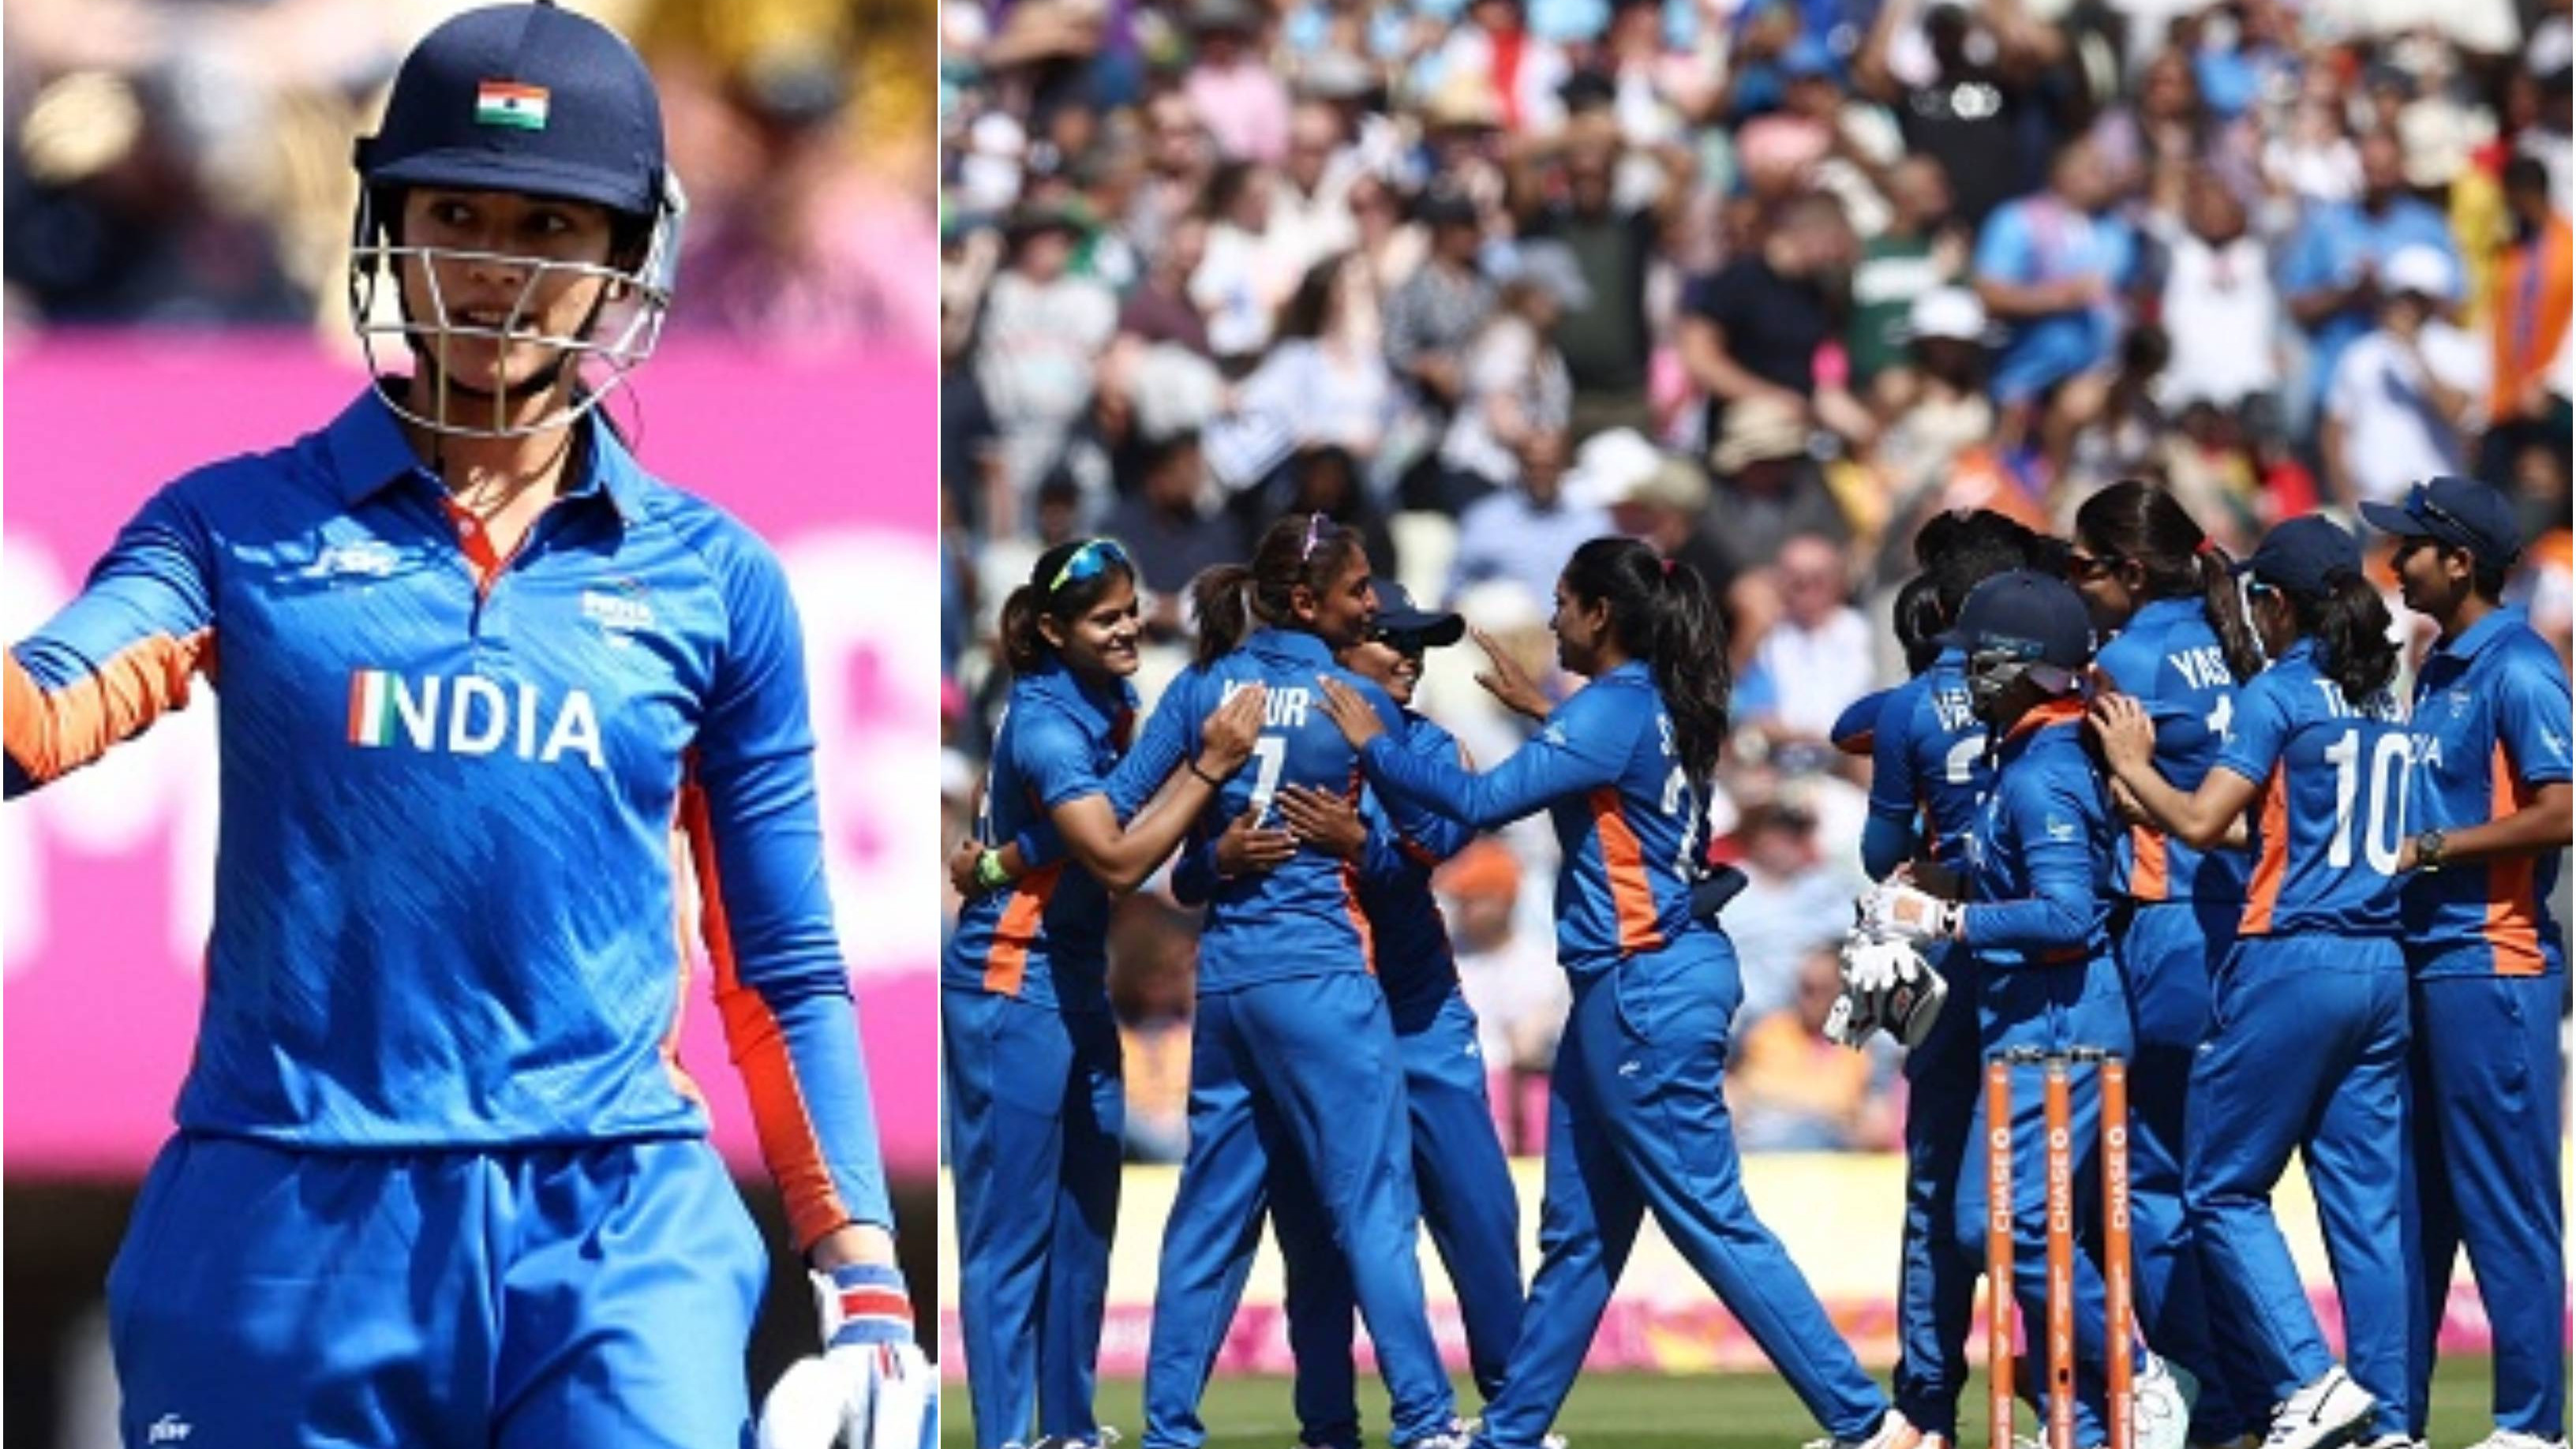 CWG 2022: ‘Was hoping to get over the line this time’ – Mandhana after India beat England in last-over thriller to reach final